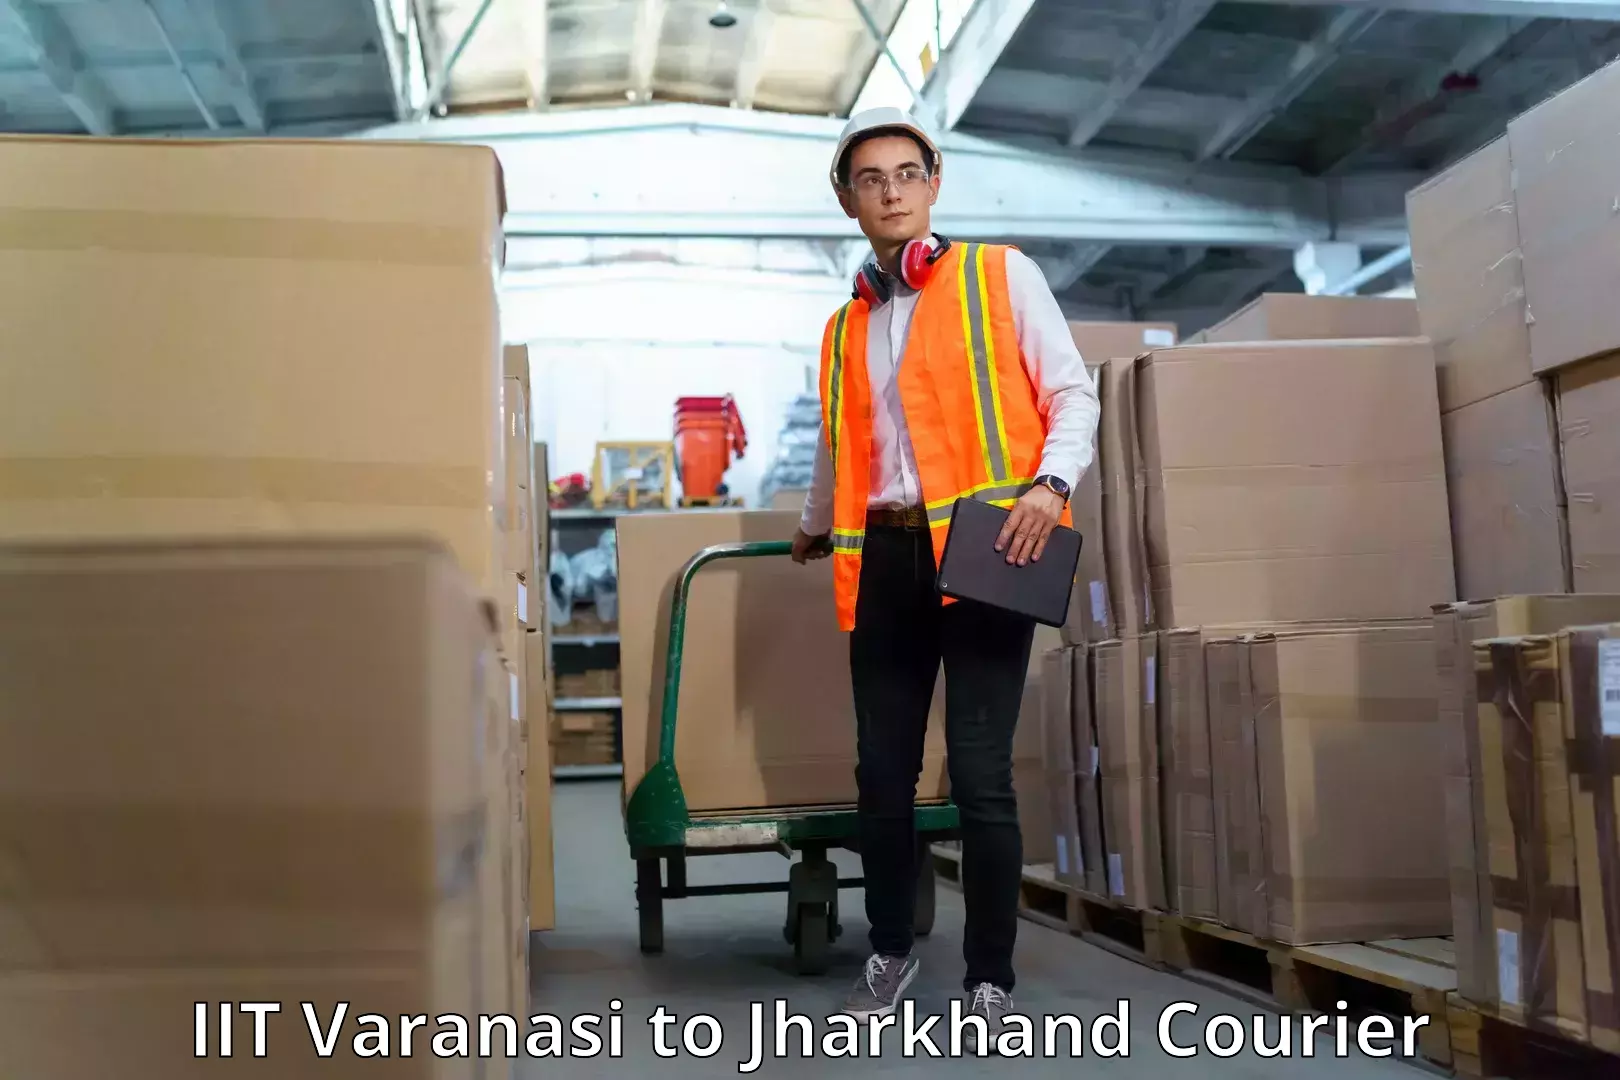 Optimized shipping routes in IIT Varanasi to Dhanbad